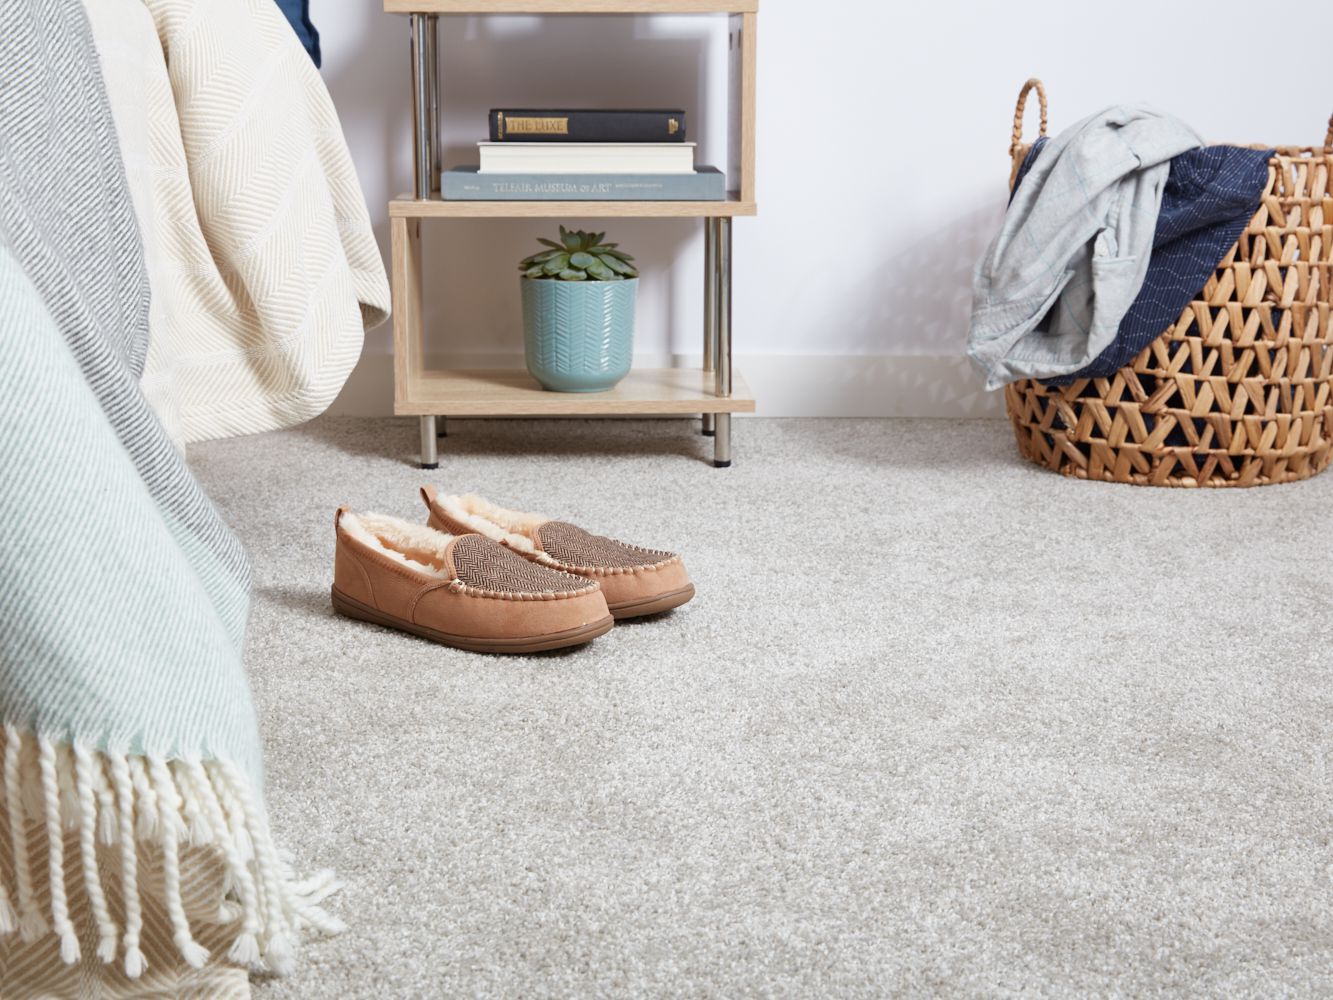 Want To Install The Carpet Flooring At Home? Here’s everything You Need To Know About!